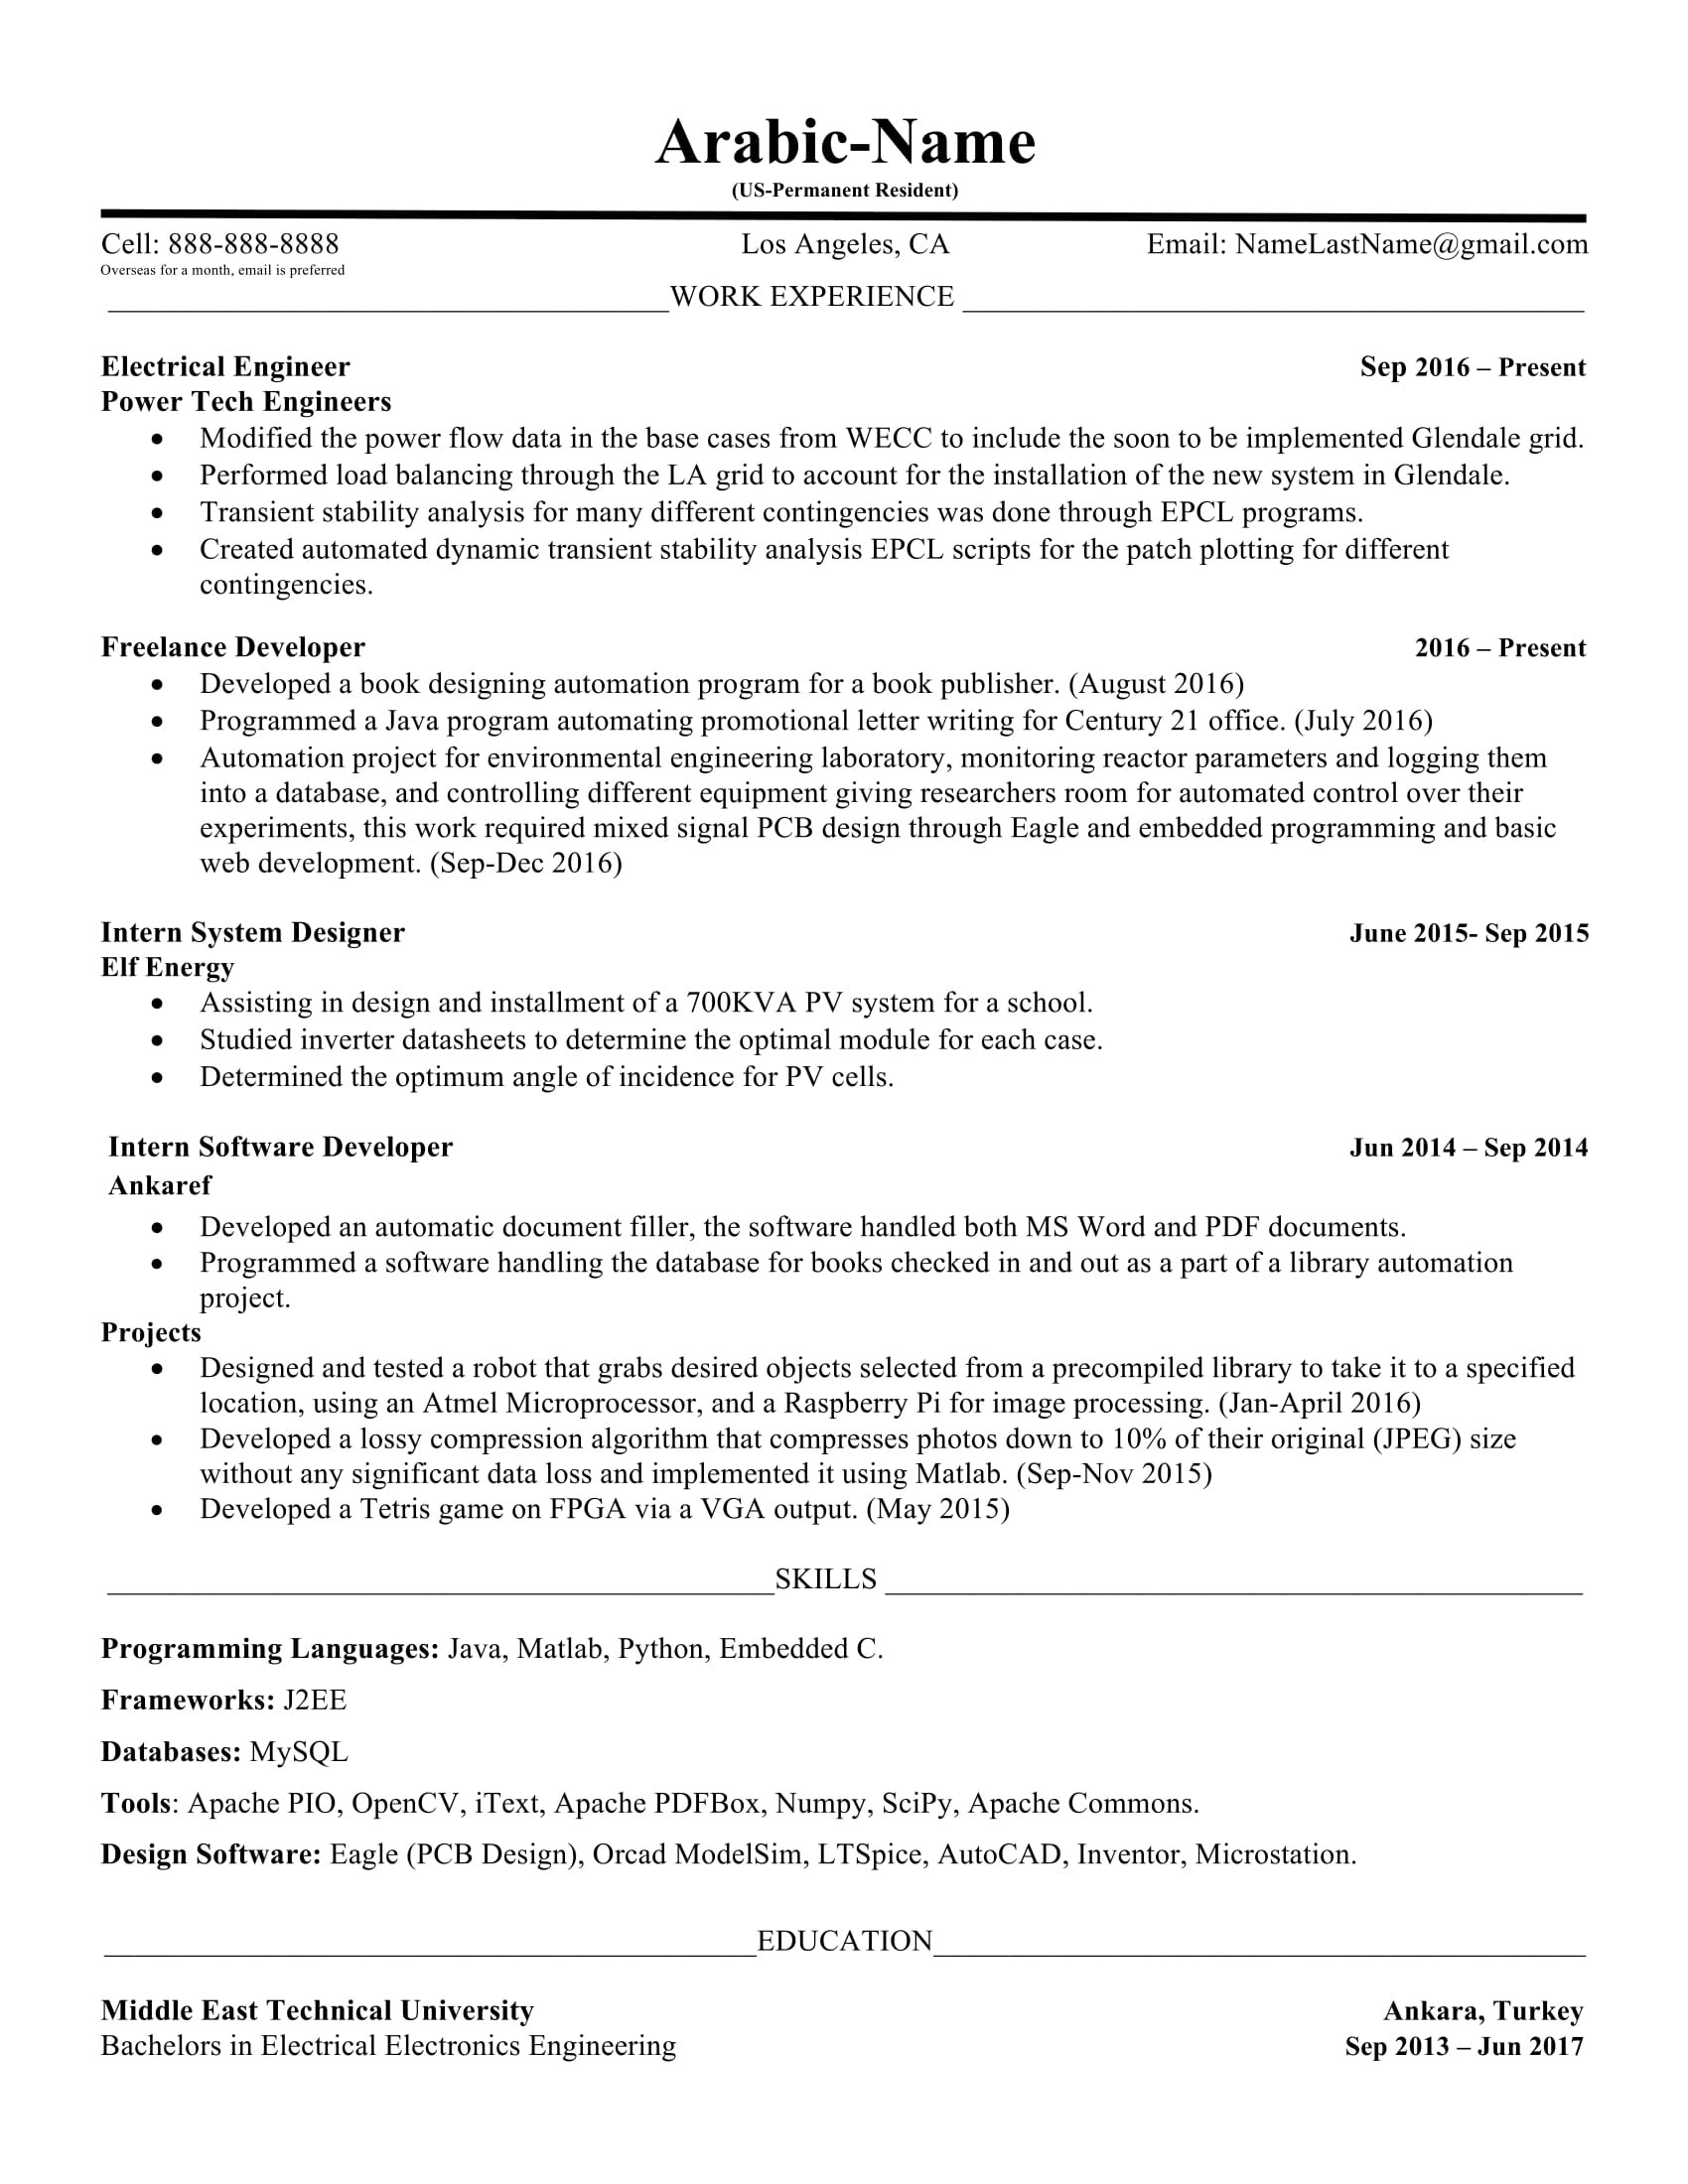 Sample Resume for New Graduate Electrical Engineer Entry Level Electrical Engineer Resume : R/resumes